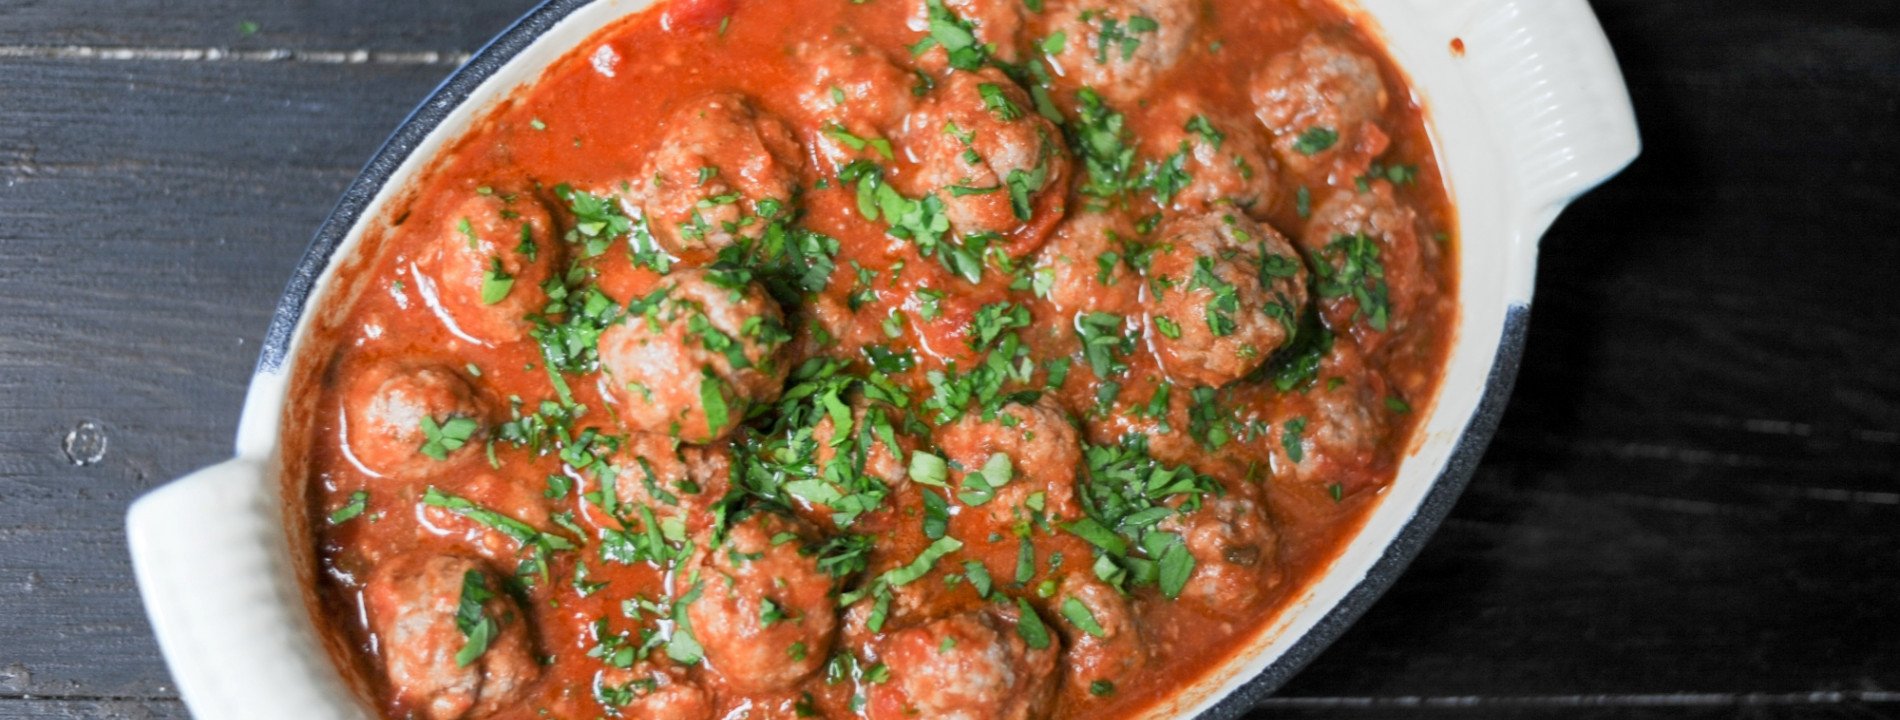 Meatballs with Spices and Zucchini Spaghetti